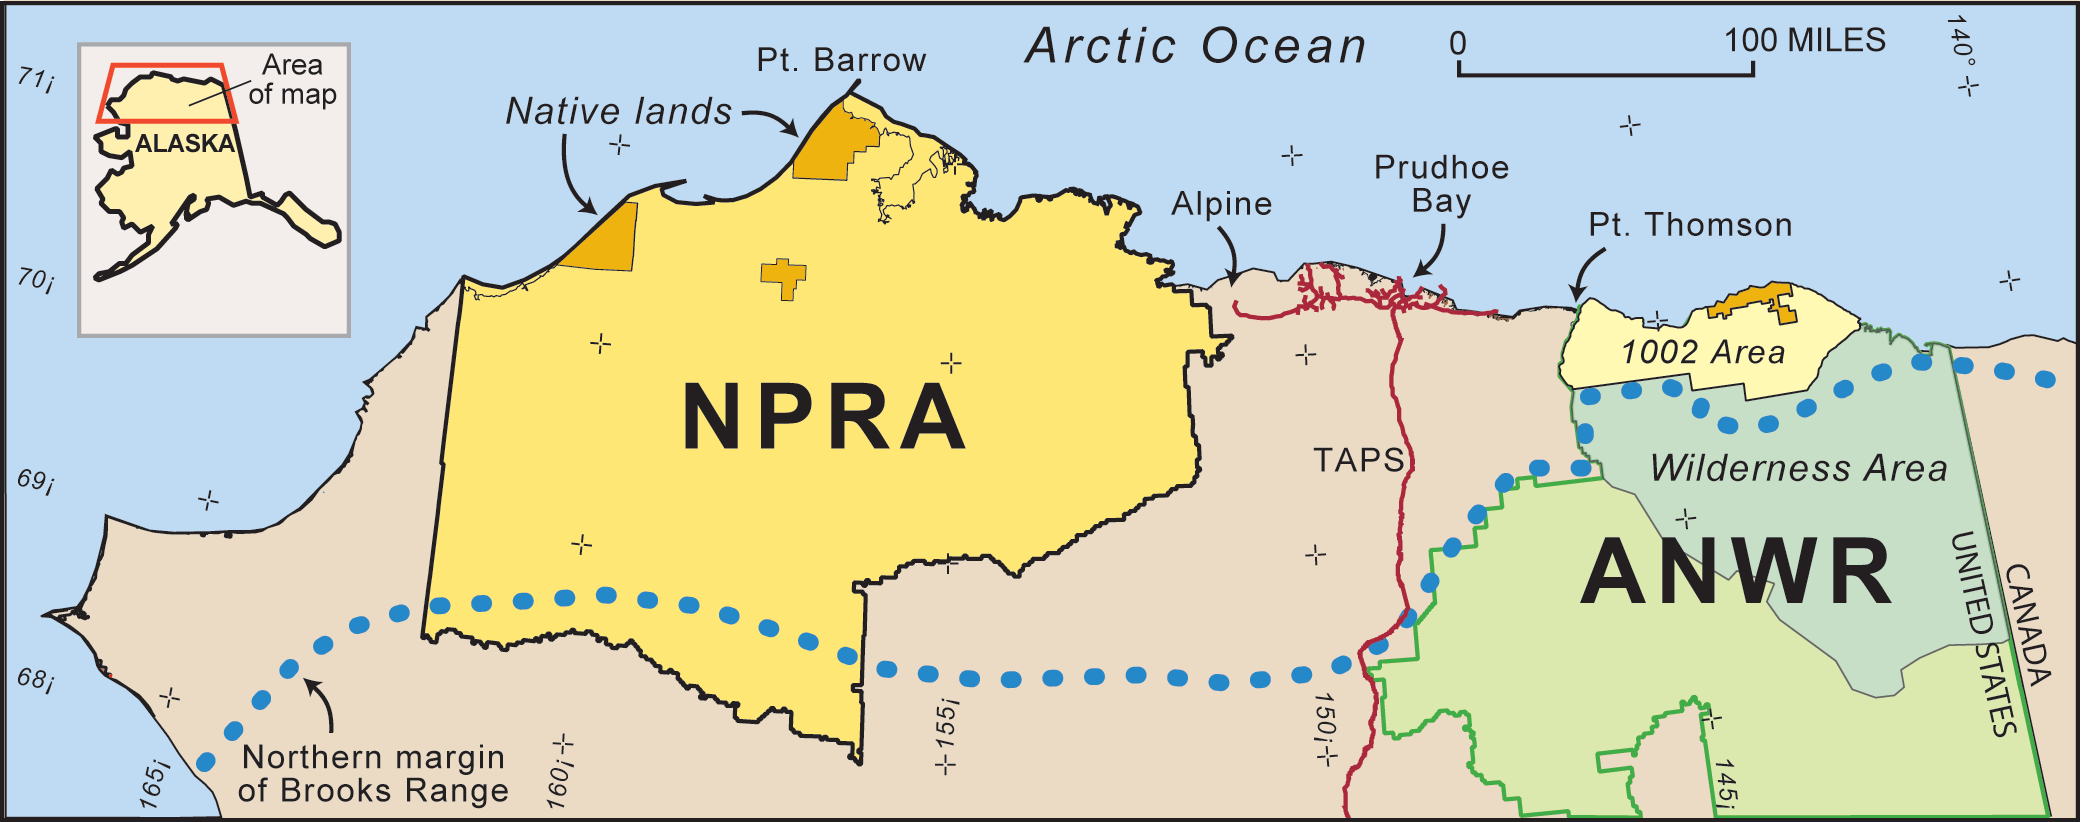 Oil and gas in the North Slope region of Alaska